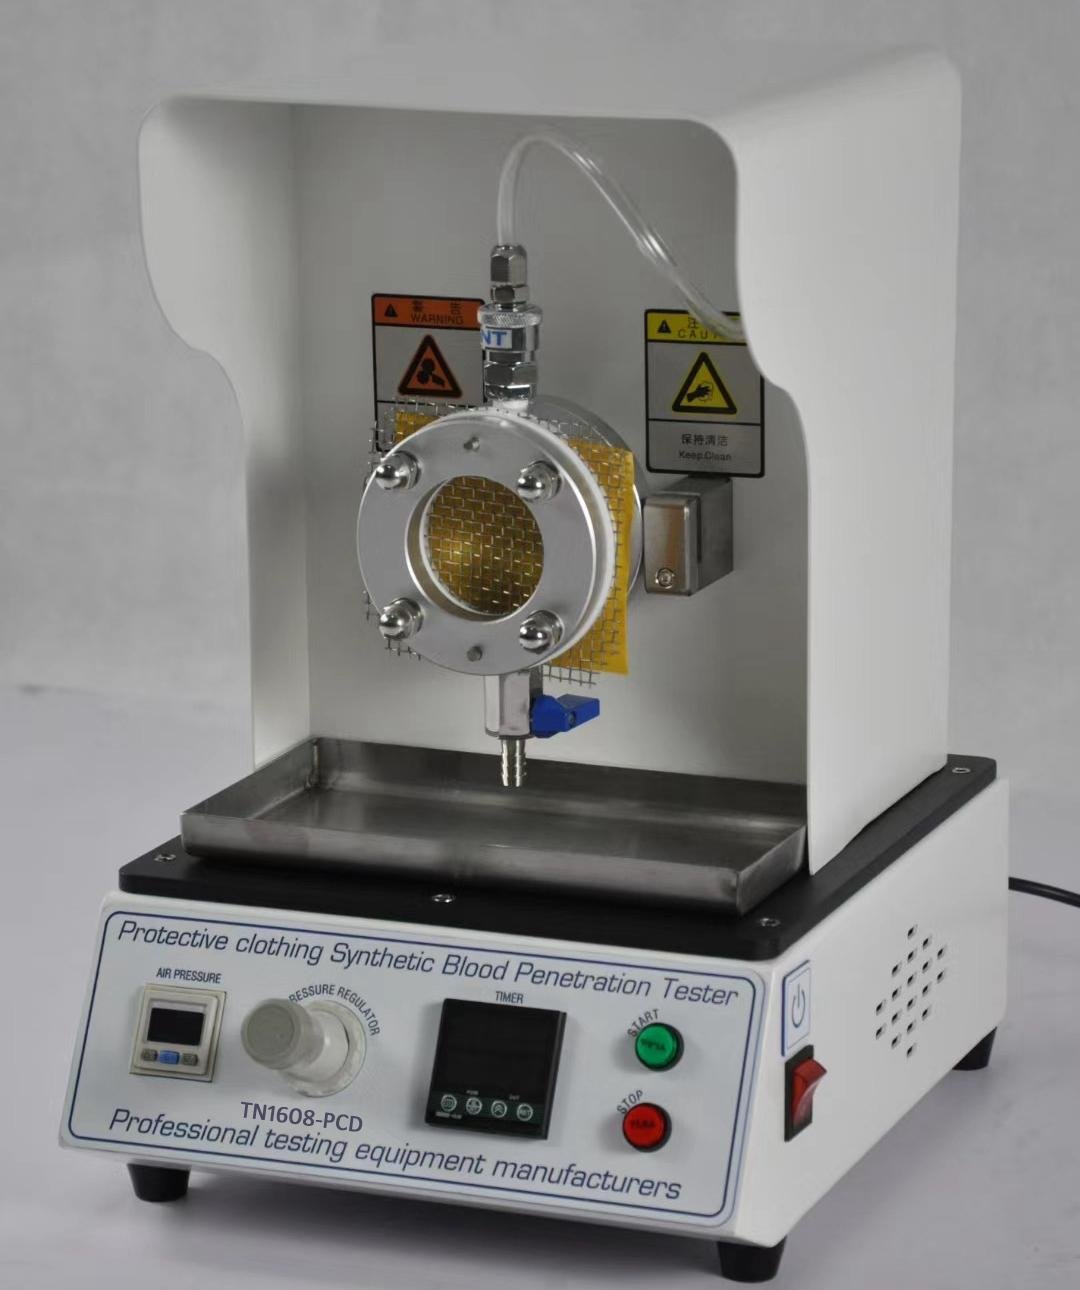  Anti-synthetic Blood Penetration Tester ISO 16603,ASTM F1670